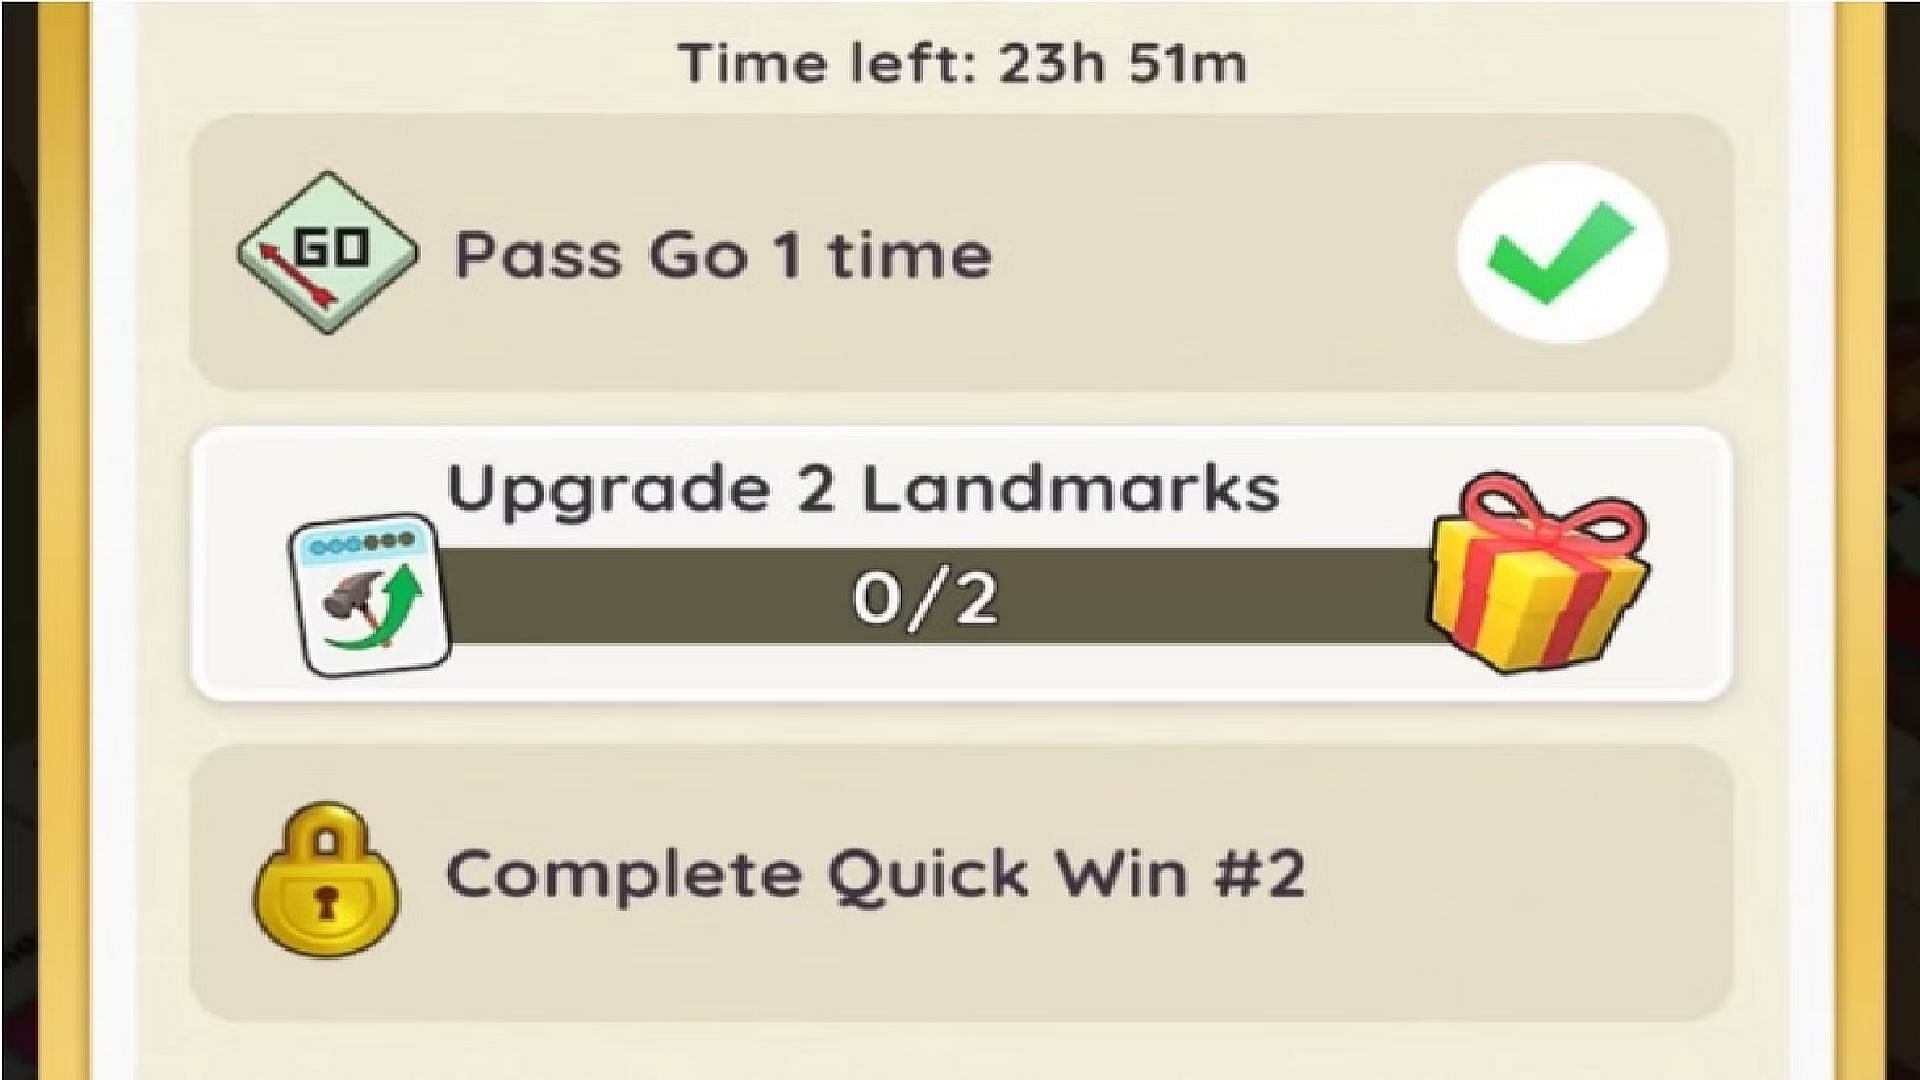 Complete simple Quick Wins tasks to earn drum tokens (Image via Scopely)